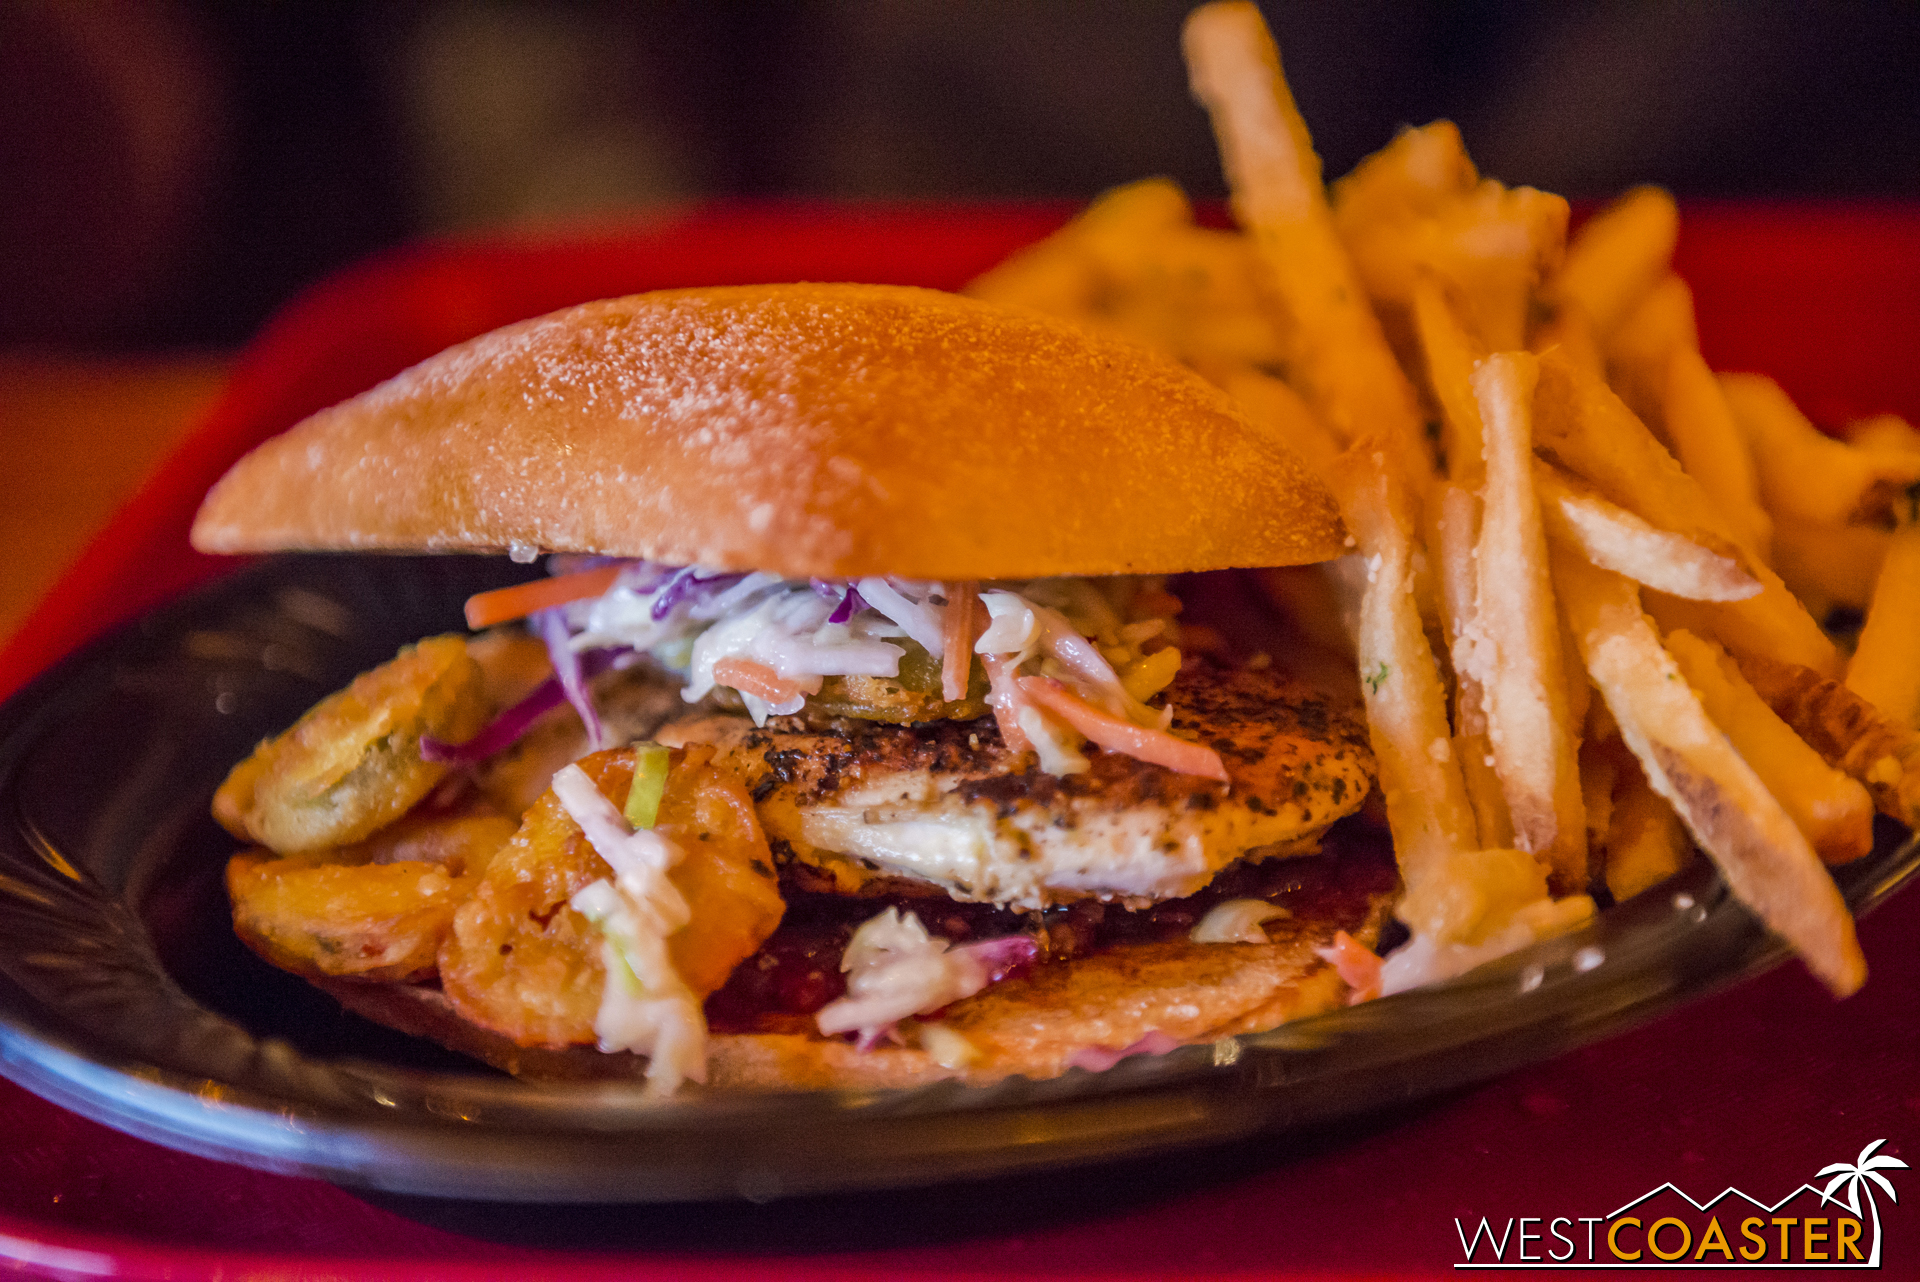  I also tried the Chicken Sandwich á la Lumière and enjoyed the rich variety of flavors.&nbsp; There are a lot of tastes in this sandwich, but for me, they formed a nice combination with a pop of spice, good seasoning, and a tender chicken breast pat